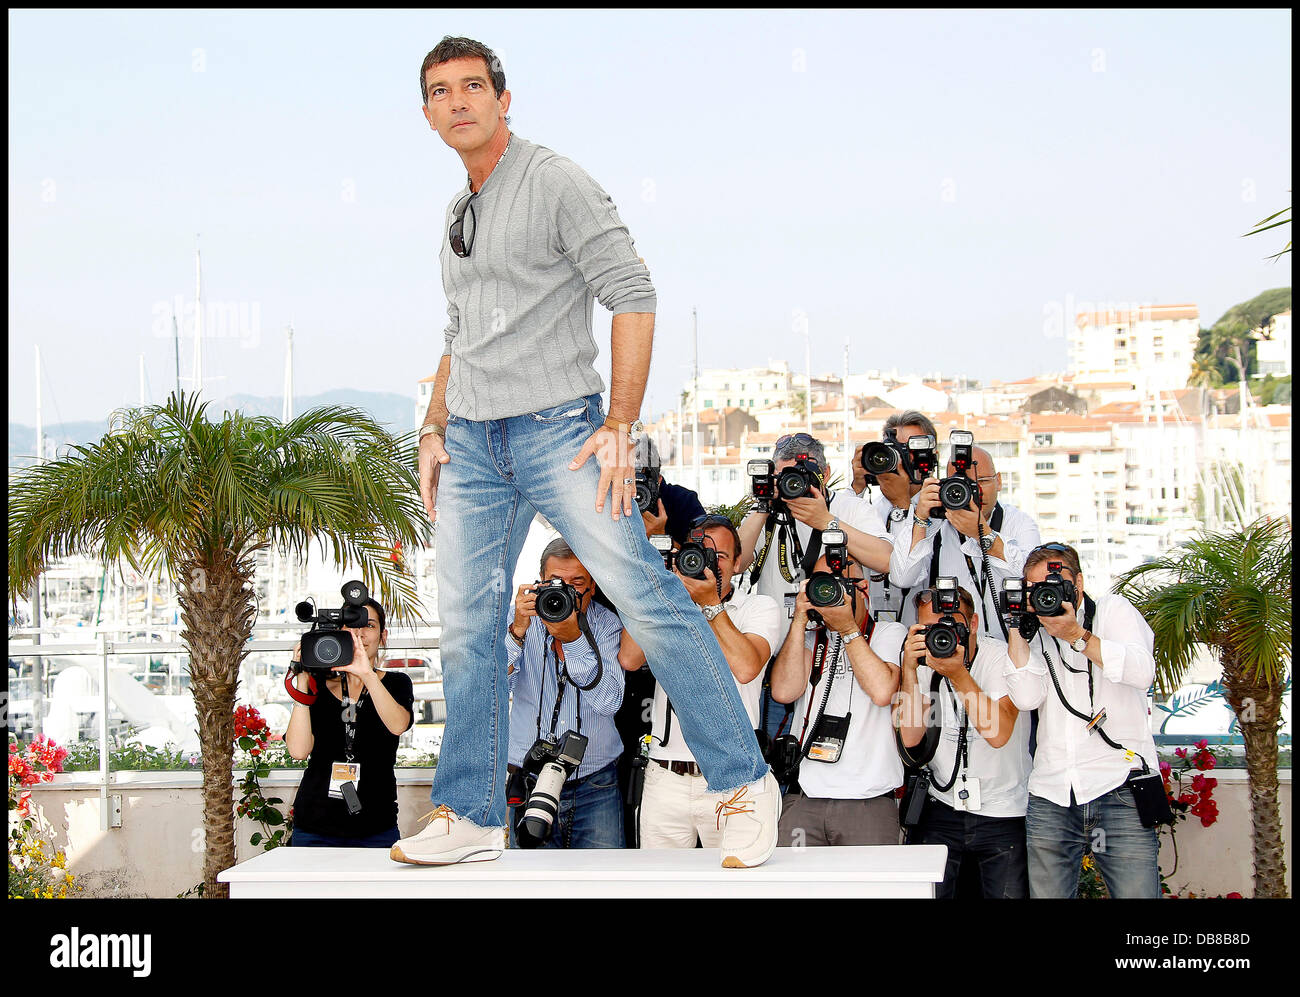 Antonio Banderas 2011 Cannes International Film Festival - Day 9 -The Skin I Live In - Photocall Cannes, France - 19.05.11 Stock Photo